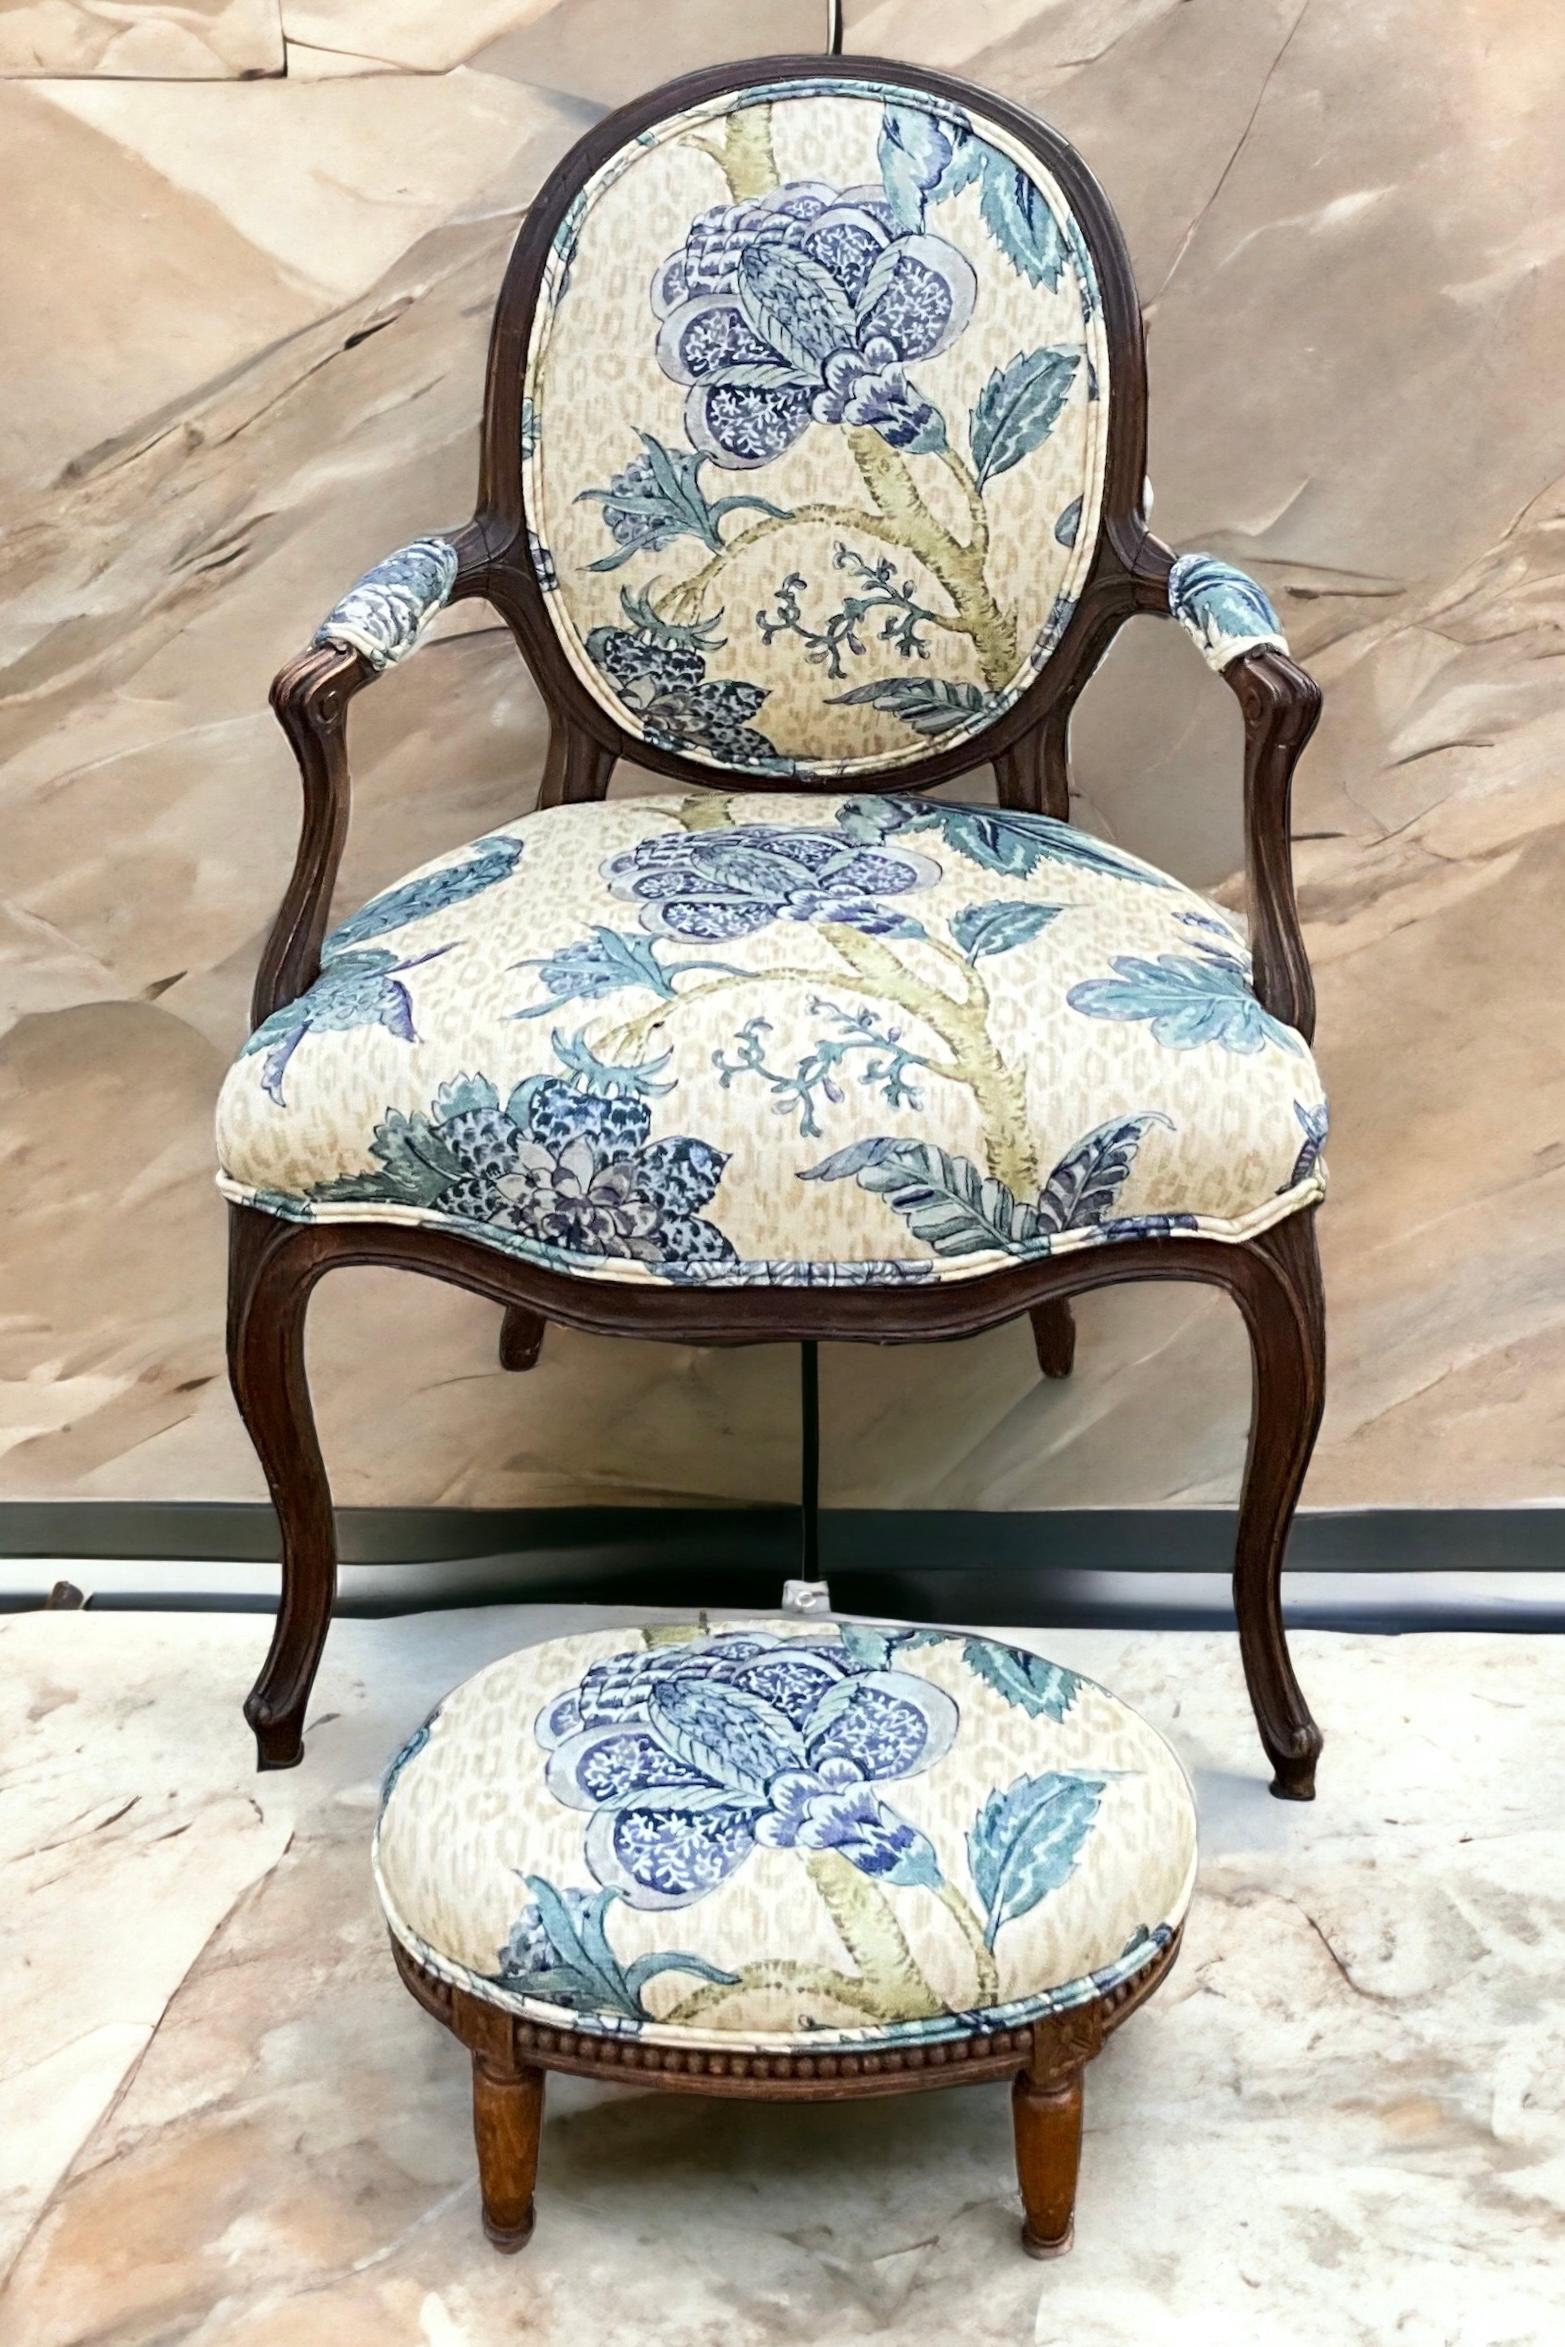 Antique French Fruitwood Berger Chair & Ottoman In Blue Floral & Leopard - S/2 In Good Condition For Sale In Kennesaw, GA